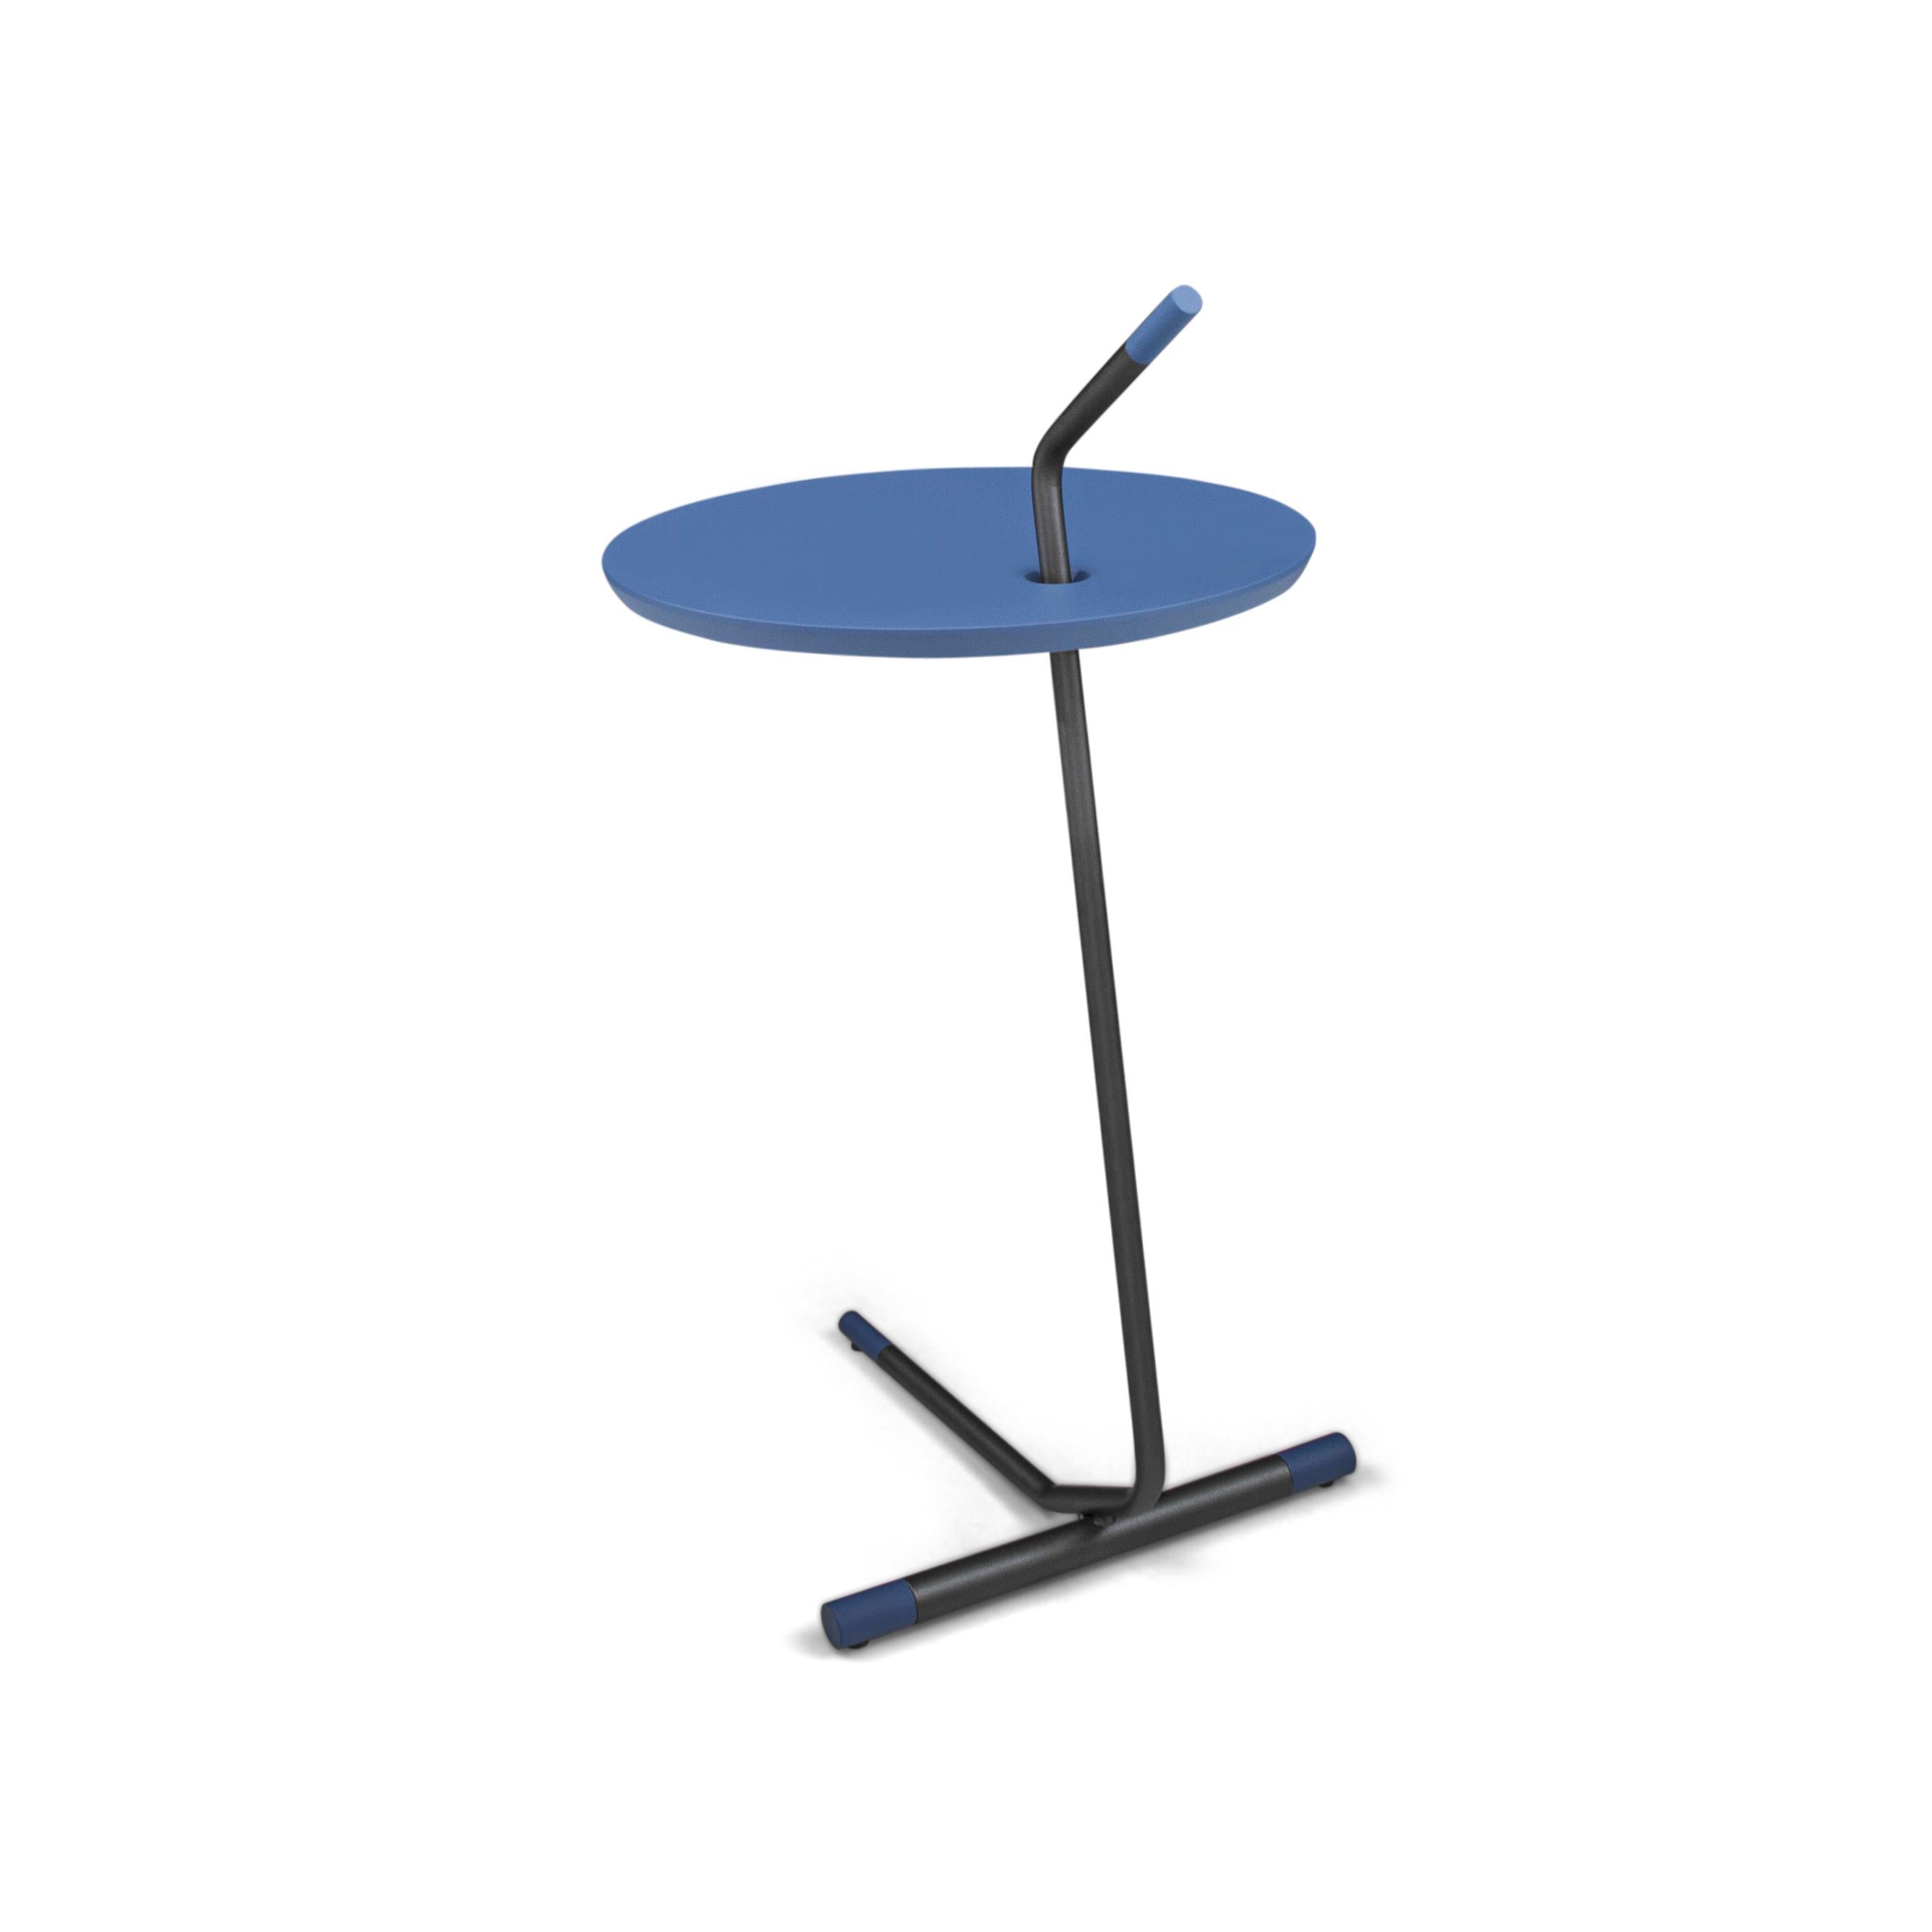 The like side table features an MDF wood top in a blue finish and a metal base. This table is made of parallels, giving a distinctive shape and an unconventional look. This table features a light pink wood finish and the metal will attract all the